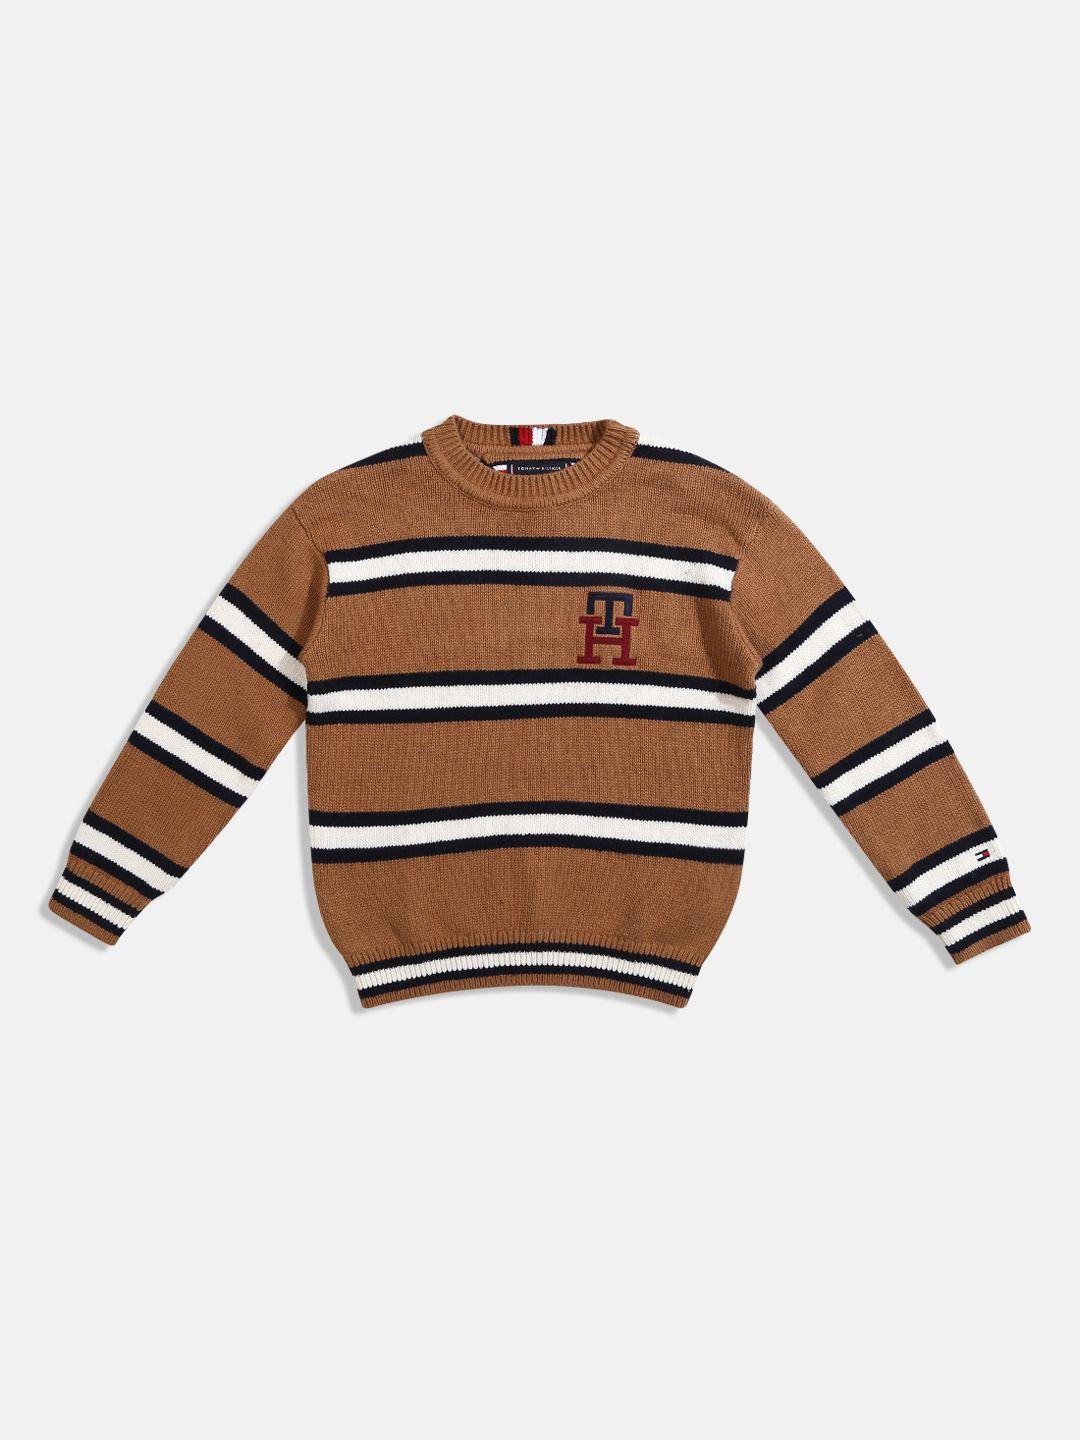 tommy hilfiger boys striped pullover